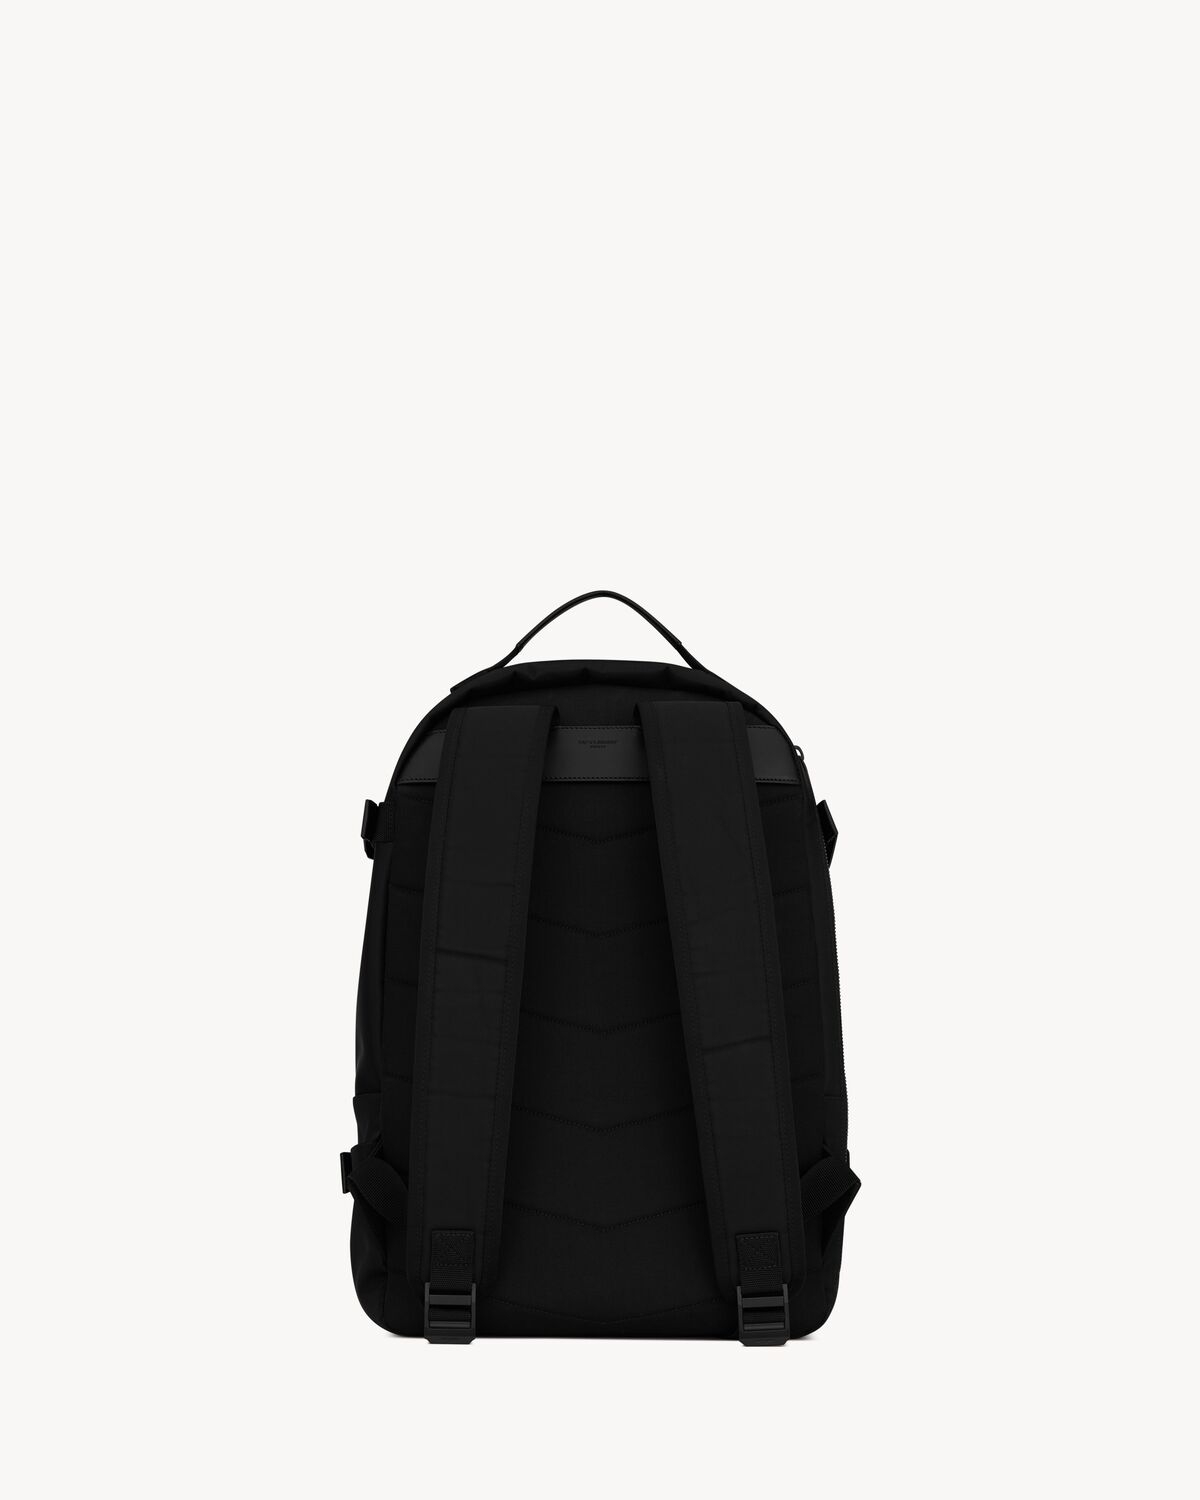 City trekking backpack in ECONYL®, smooth leather and nylon